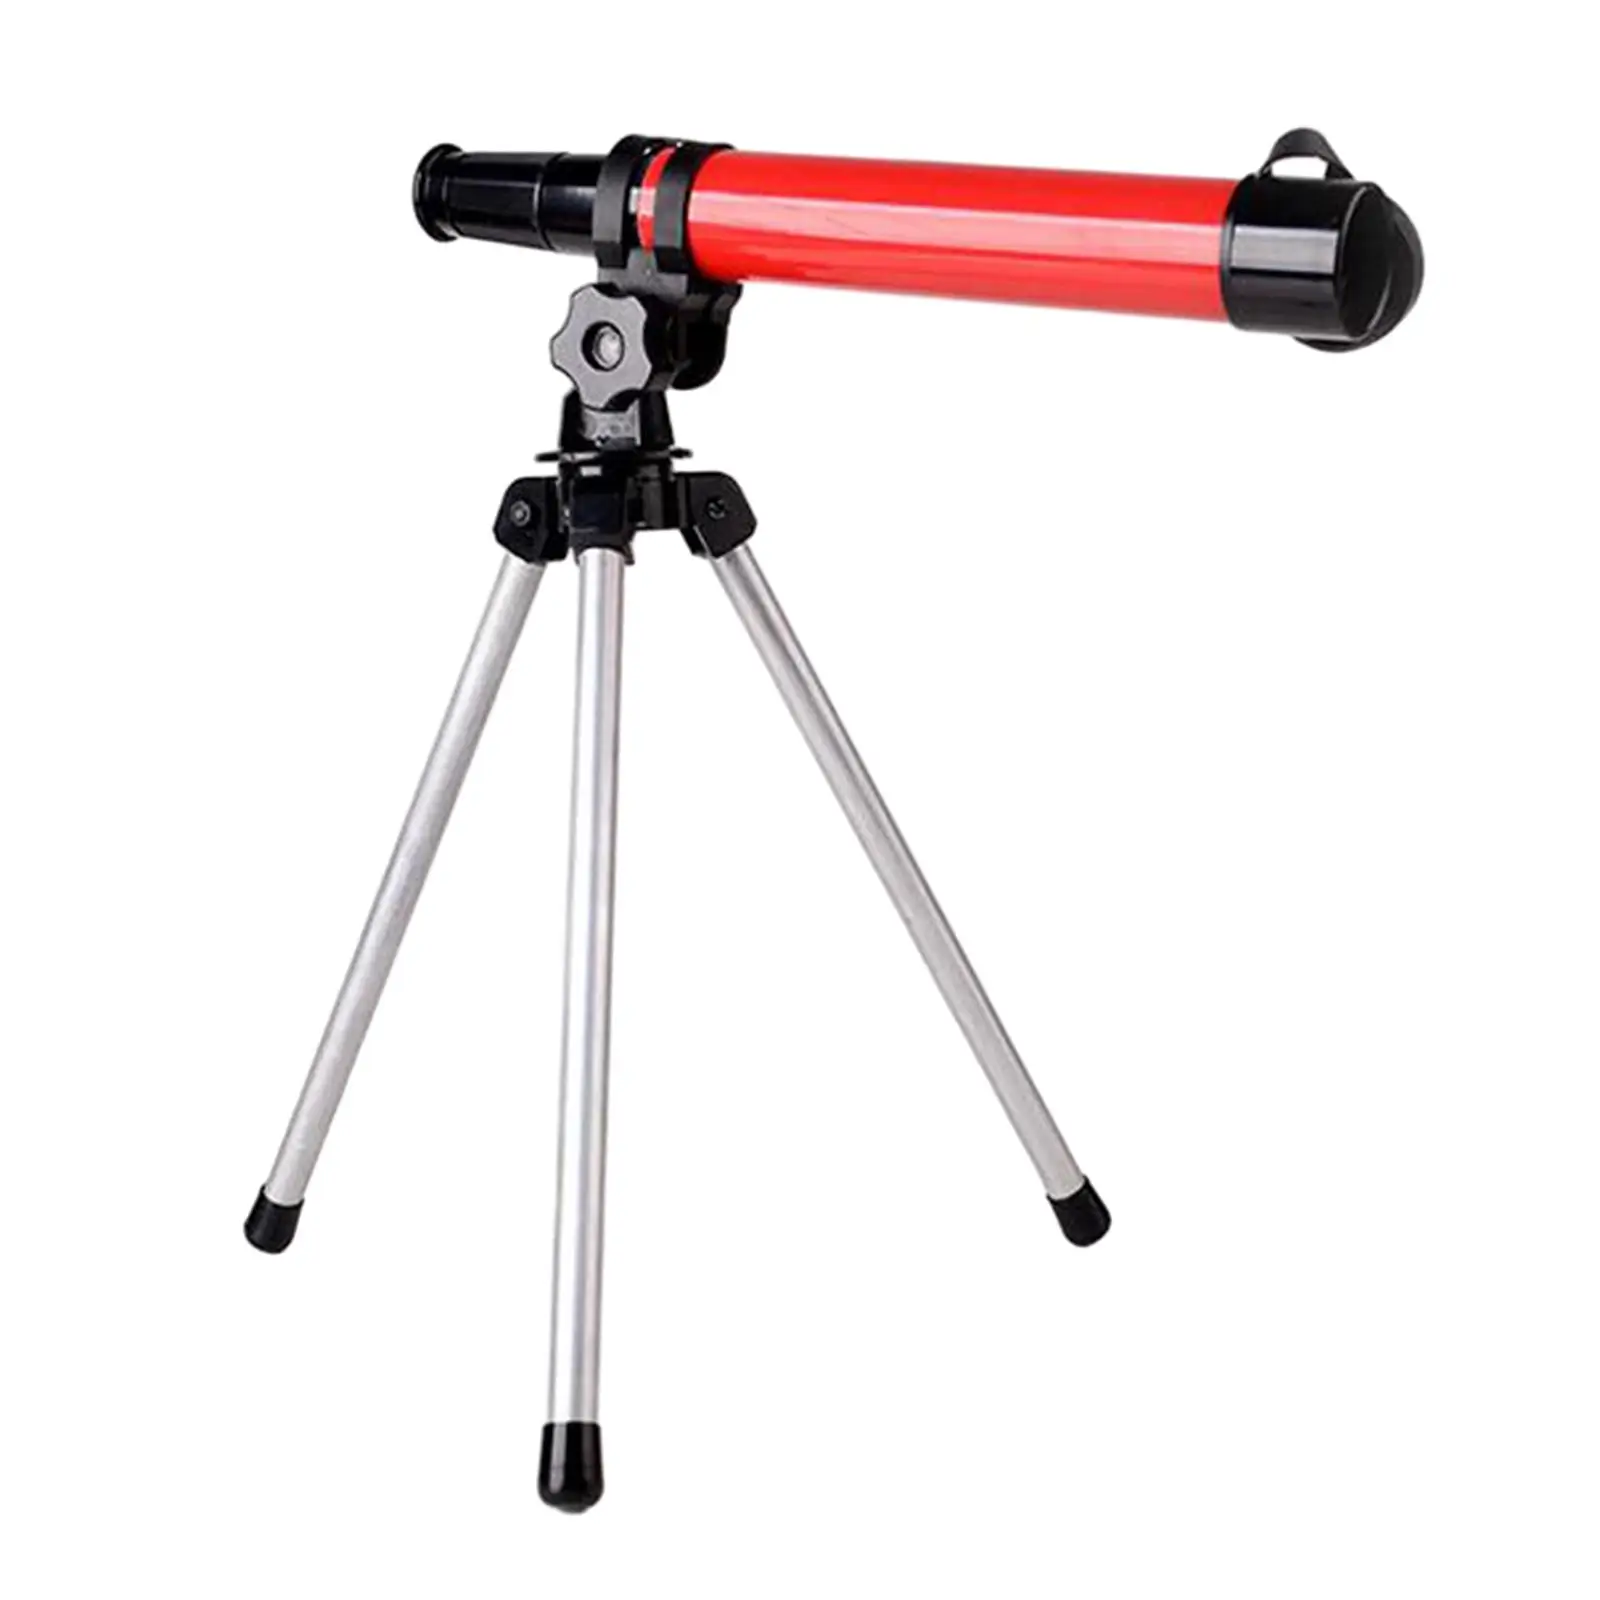 Single Telescope, Astronomical Telescope with Adjustable Tripod, Educational Science Toys for Hiking Beginners Concert